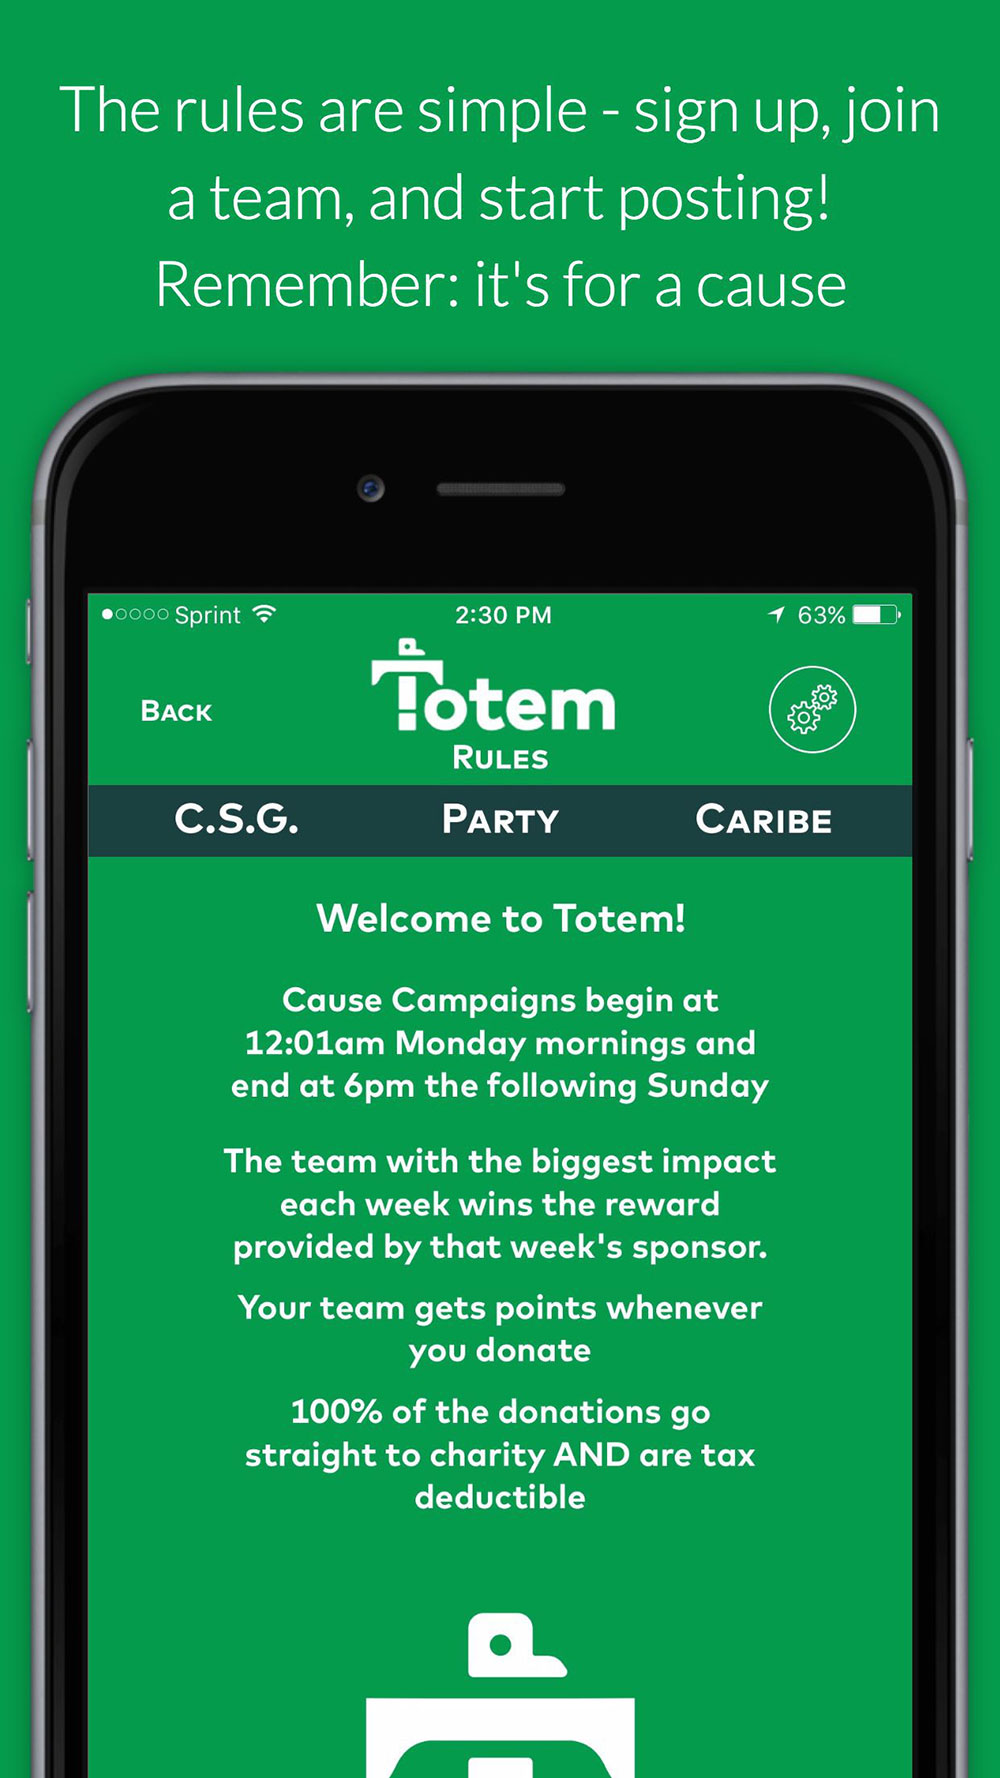 Totem’s App Store preview gives users a preview of what it’s like to play.